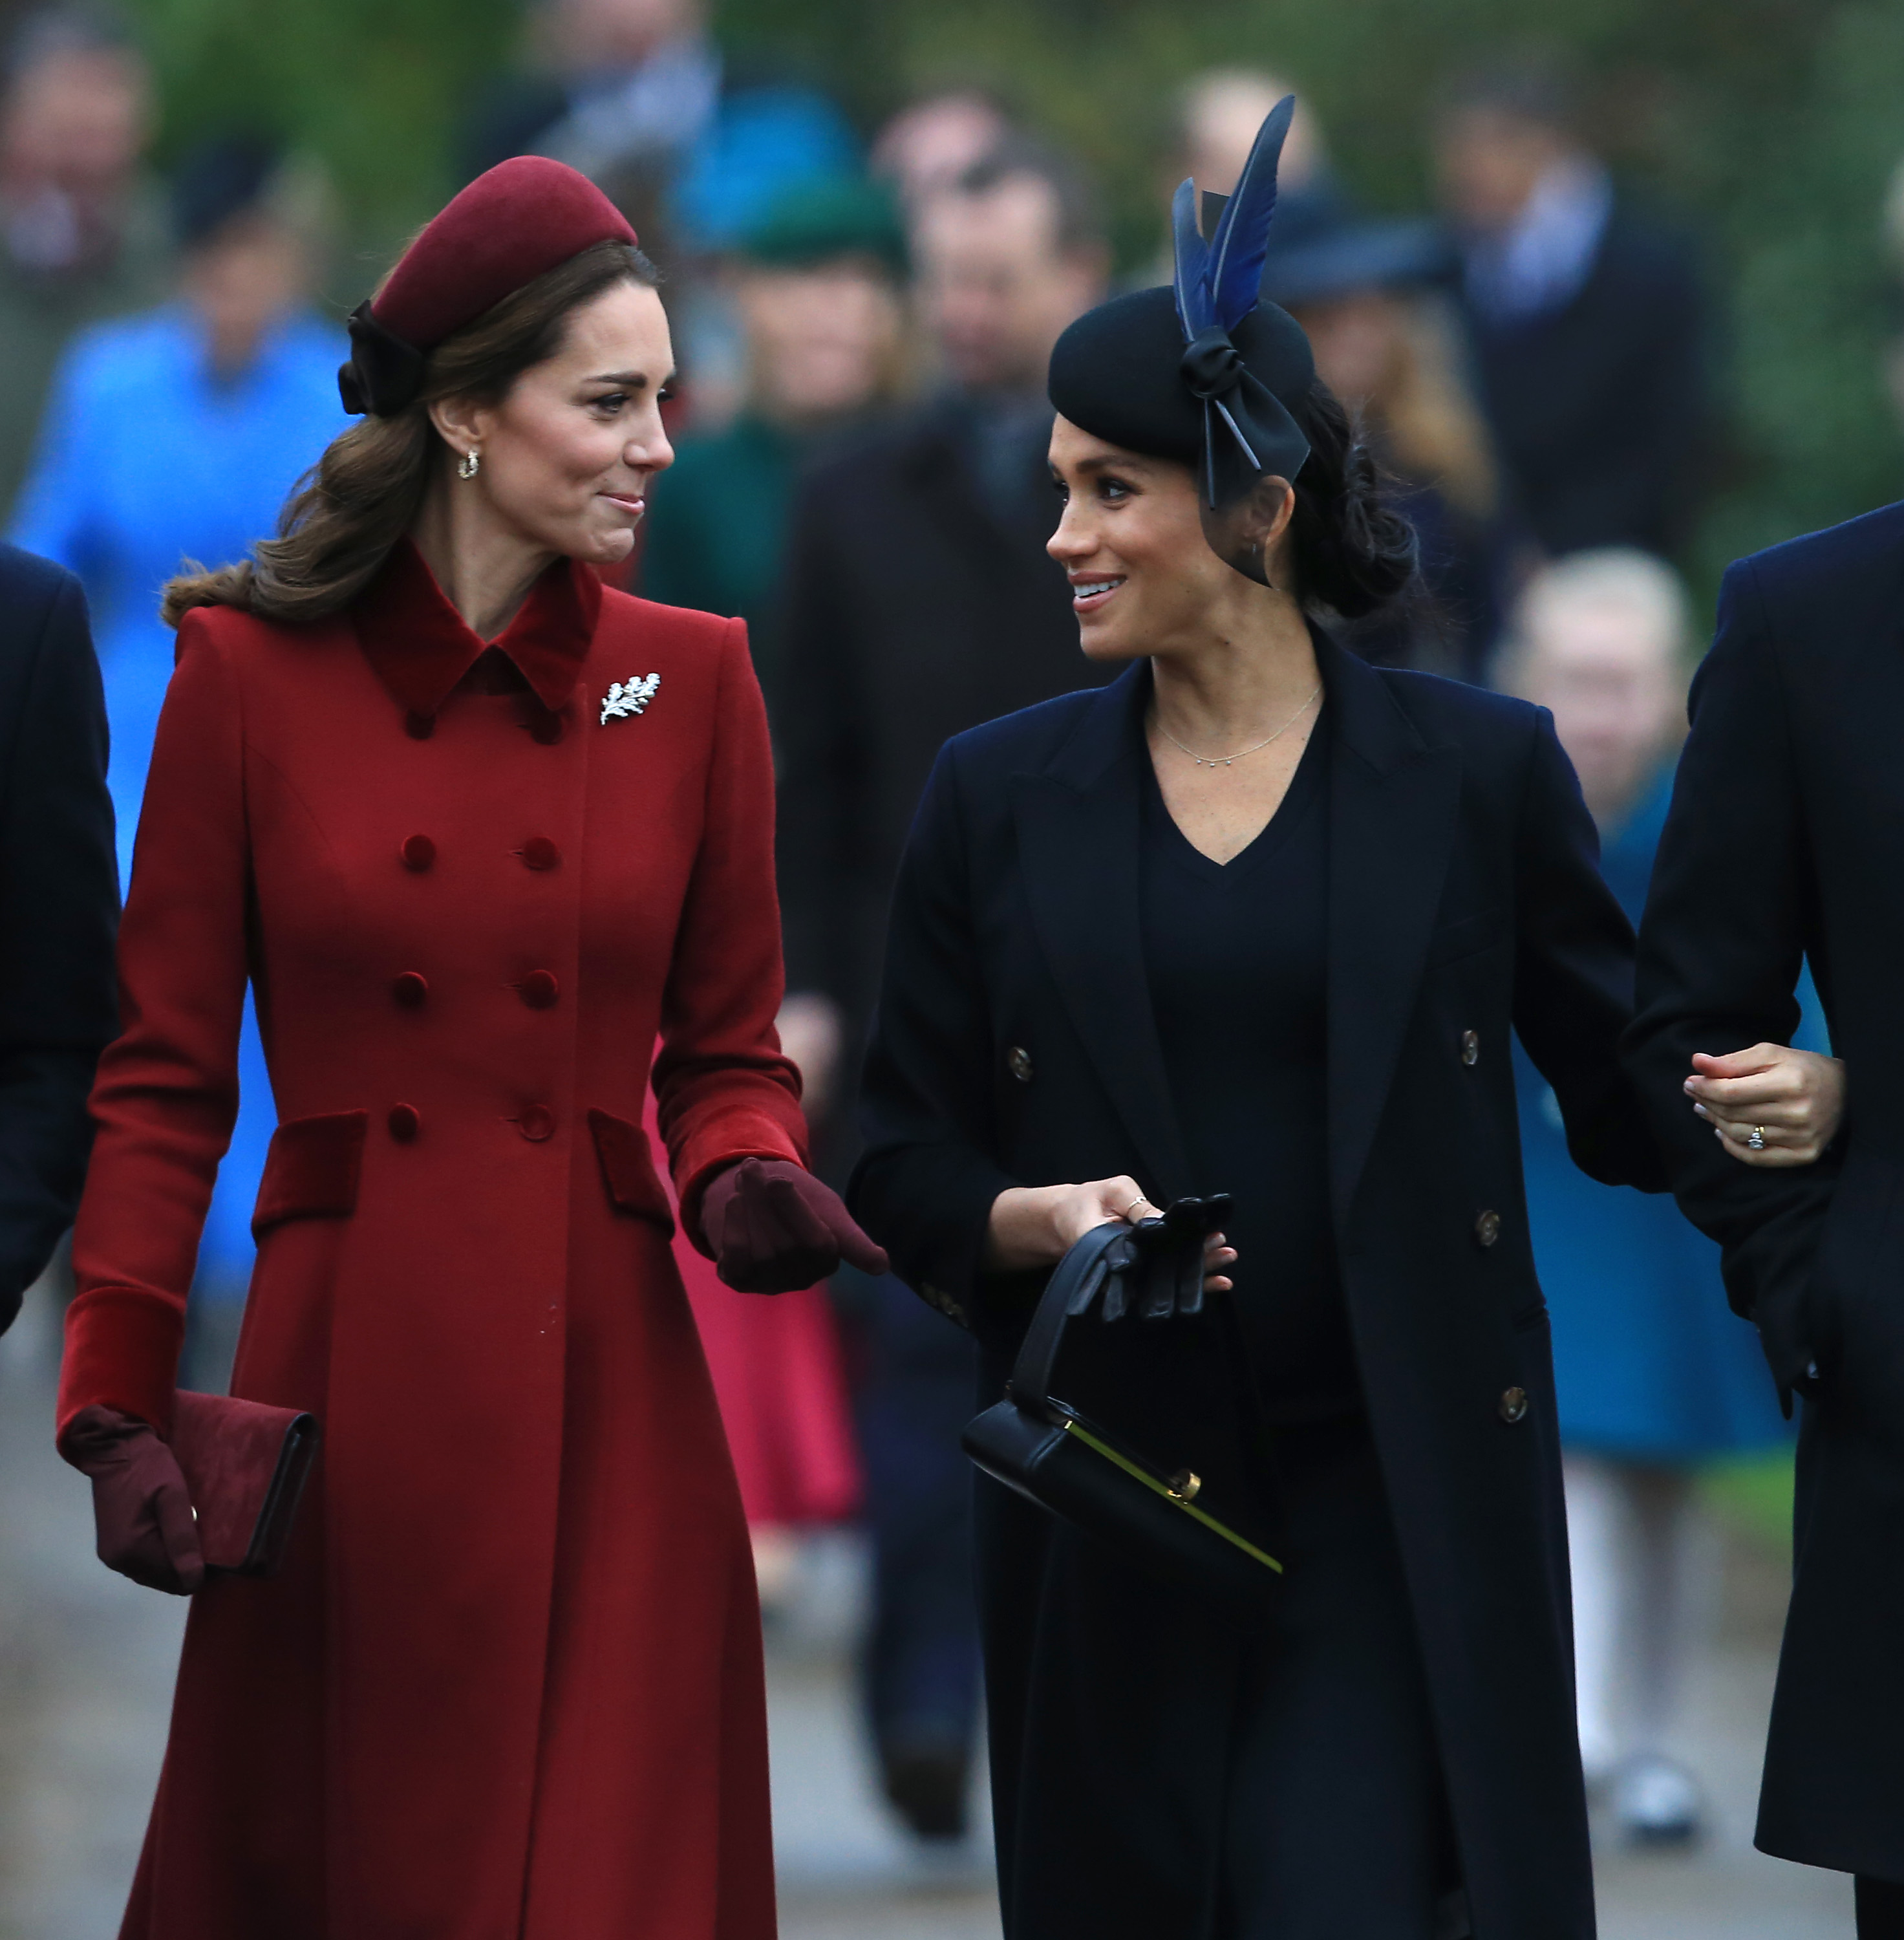 Kate Middleton and Meghan Markle at the Christmas Day Church service on December 25, 2018, in King's Lynn, England. | Source: Getty Images